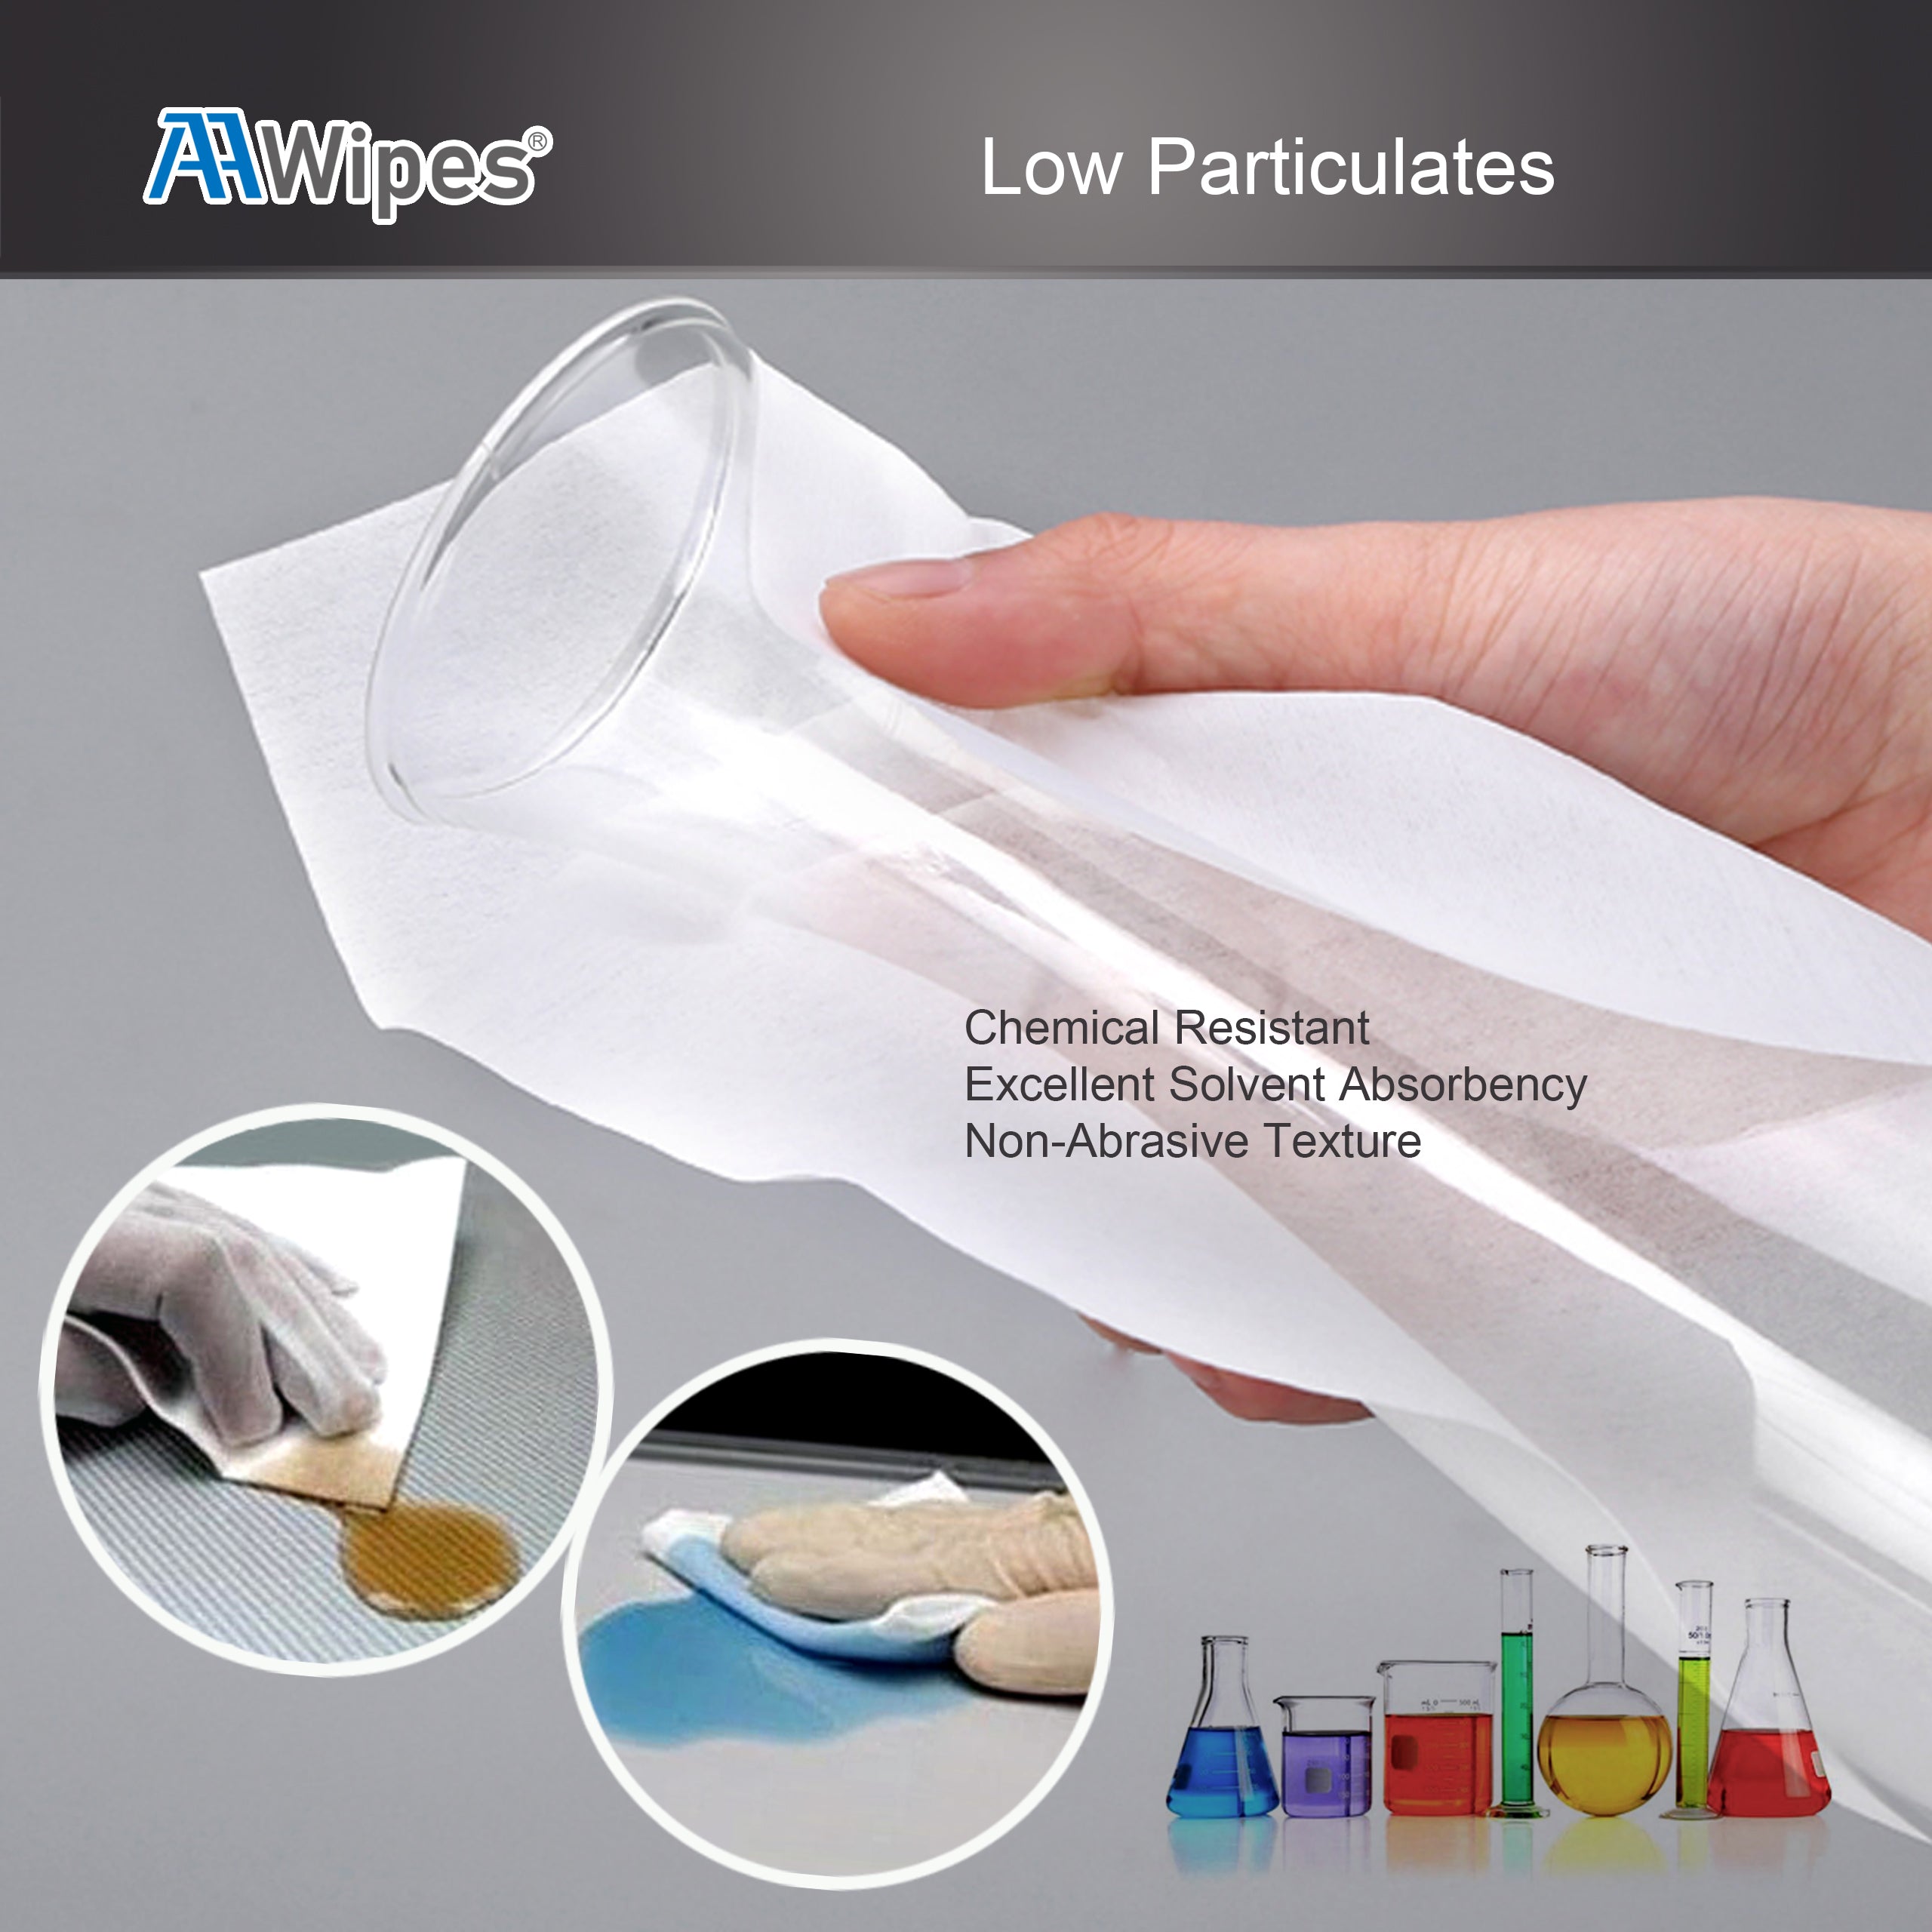 Cleanroom Nonwoven Wipes: 9"x9" Cellulose/Polyester Blend Disposable Wipers for  for Lab, Food Service, Automotive, Printing and Semiconductor Industries.. Starts with 4,200 wipes/box in 14 bags (No. NW06809).